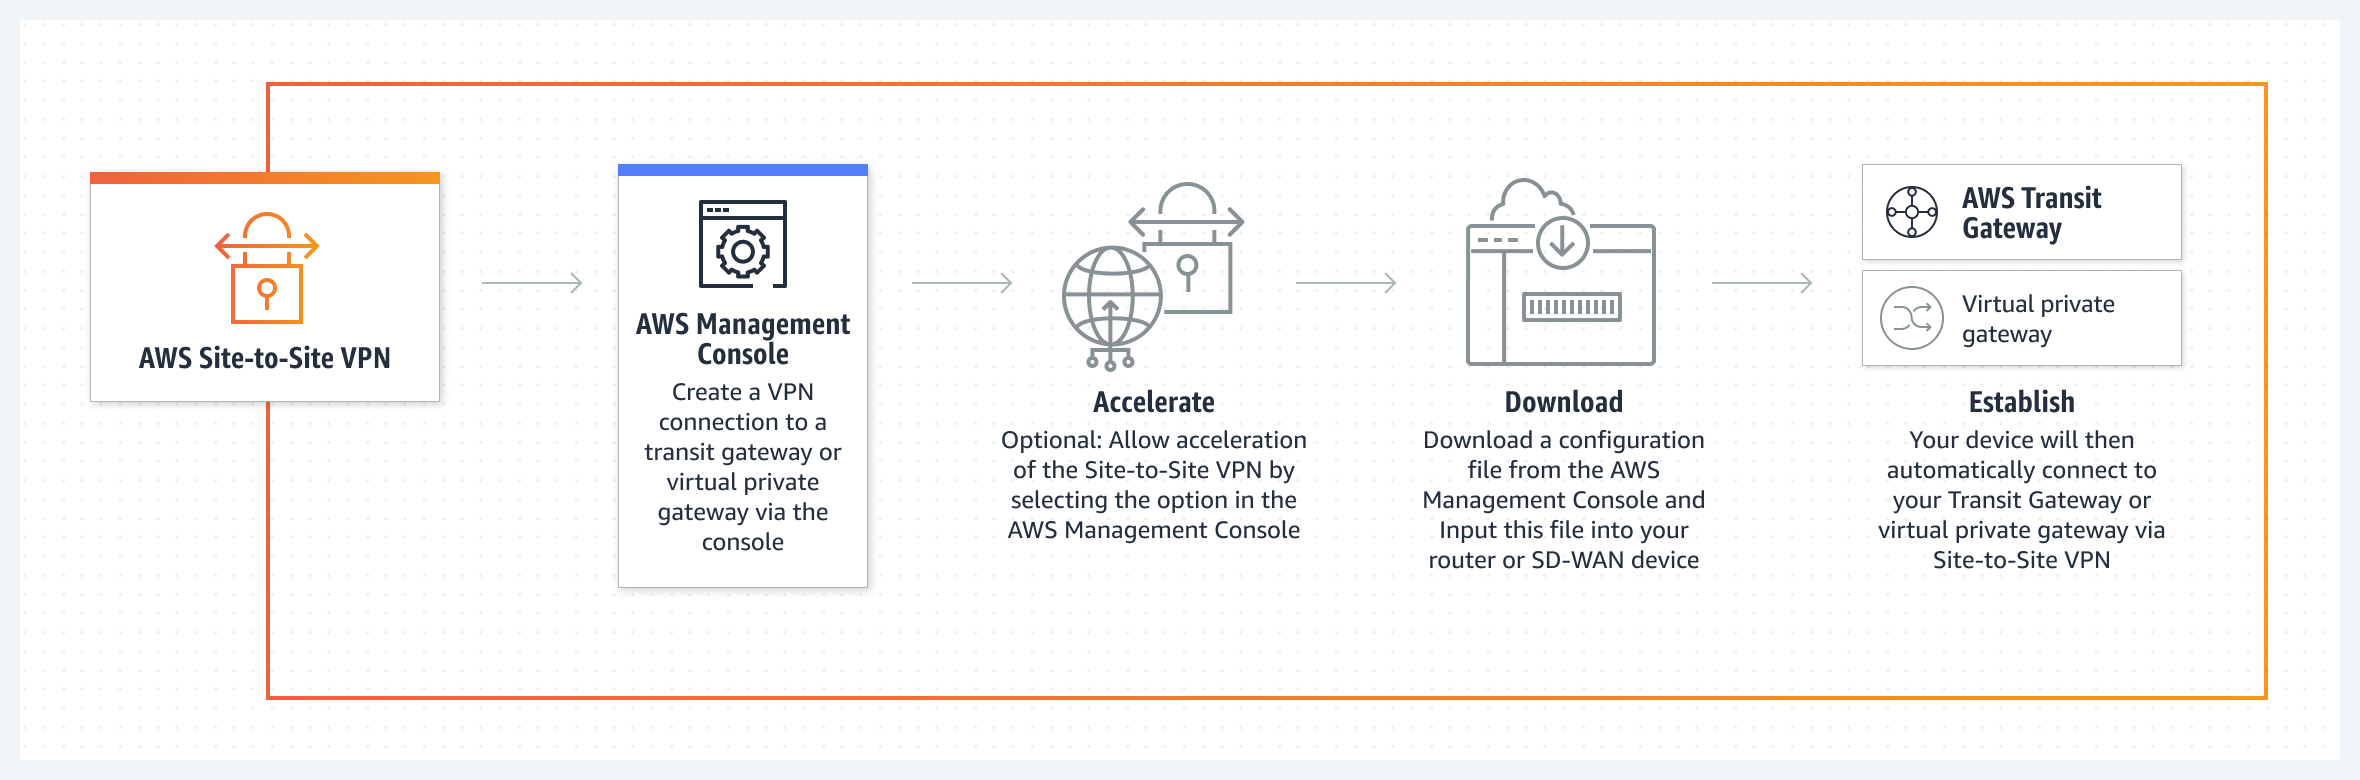 Site-to-Site VPN lets you create a VPN connection with the AWS Management Console, enable optional acceleration, download a configuration and add it to your router or SD-WAN, and then connect to your gateway.